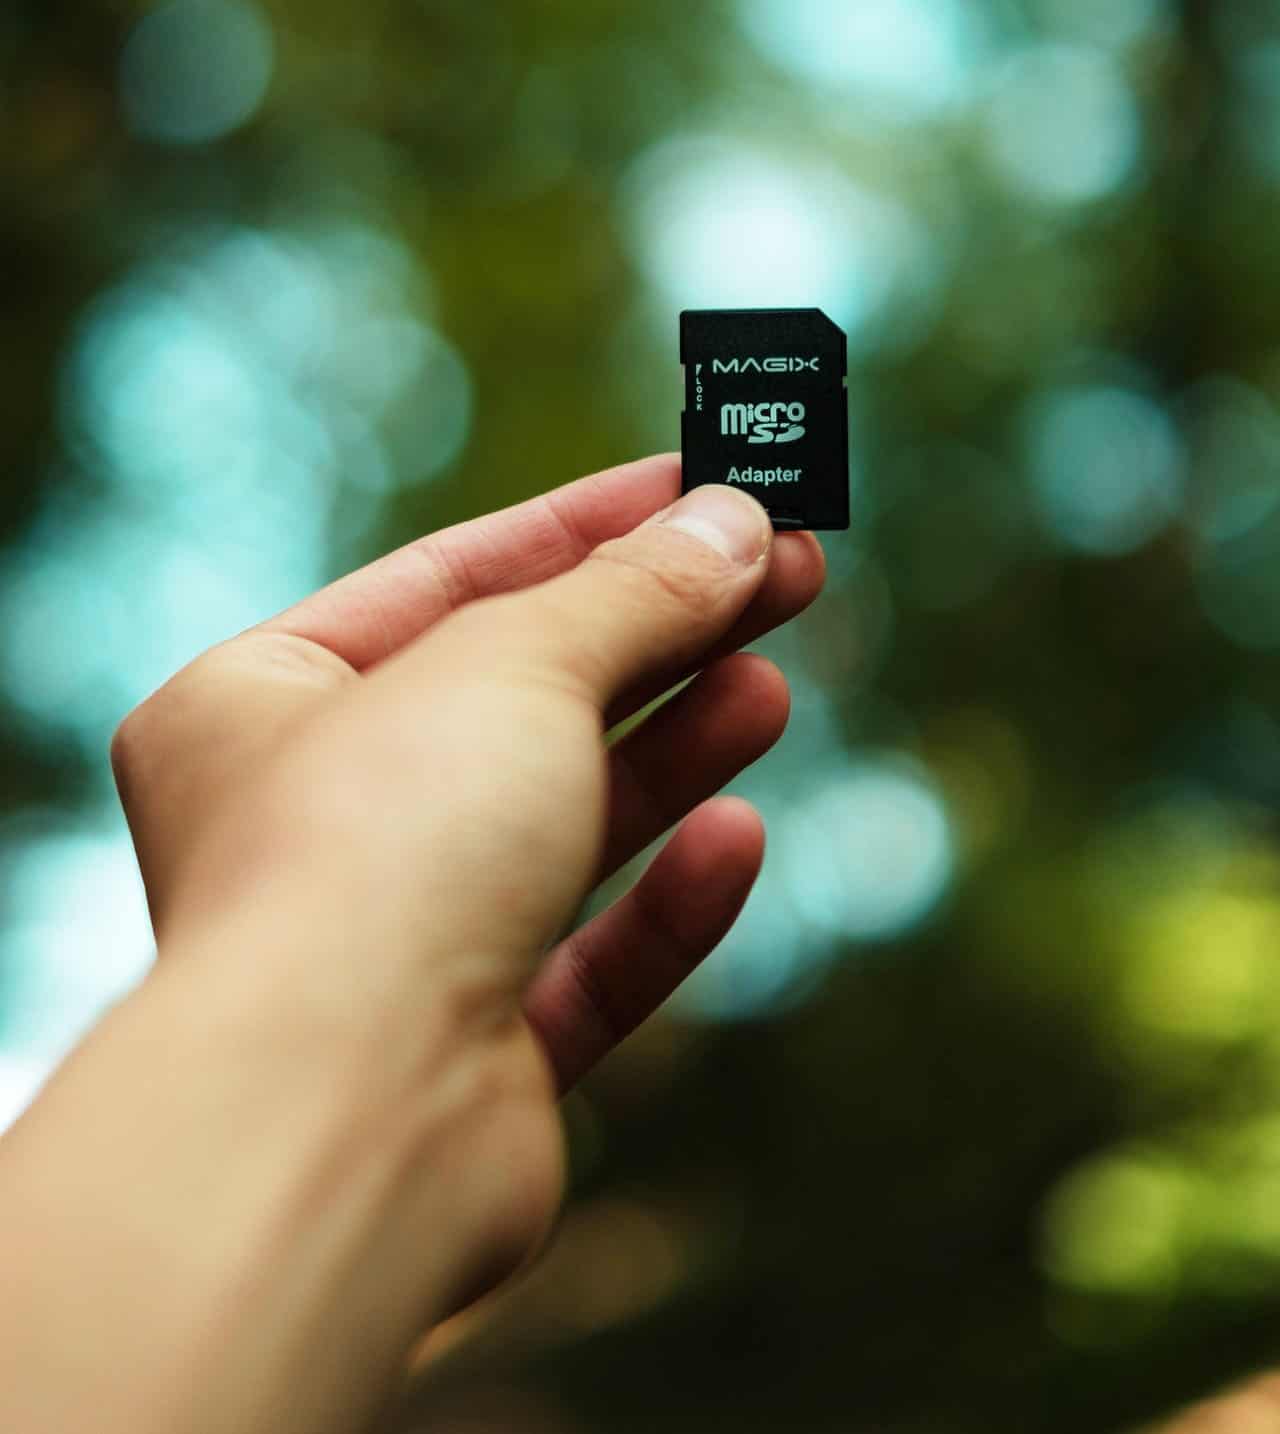 holding sd card